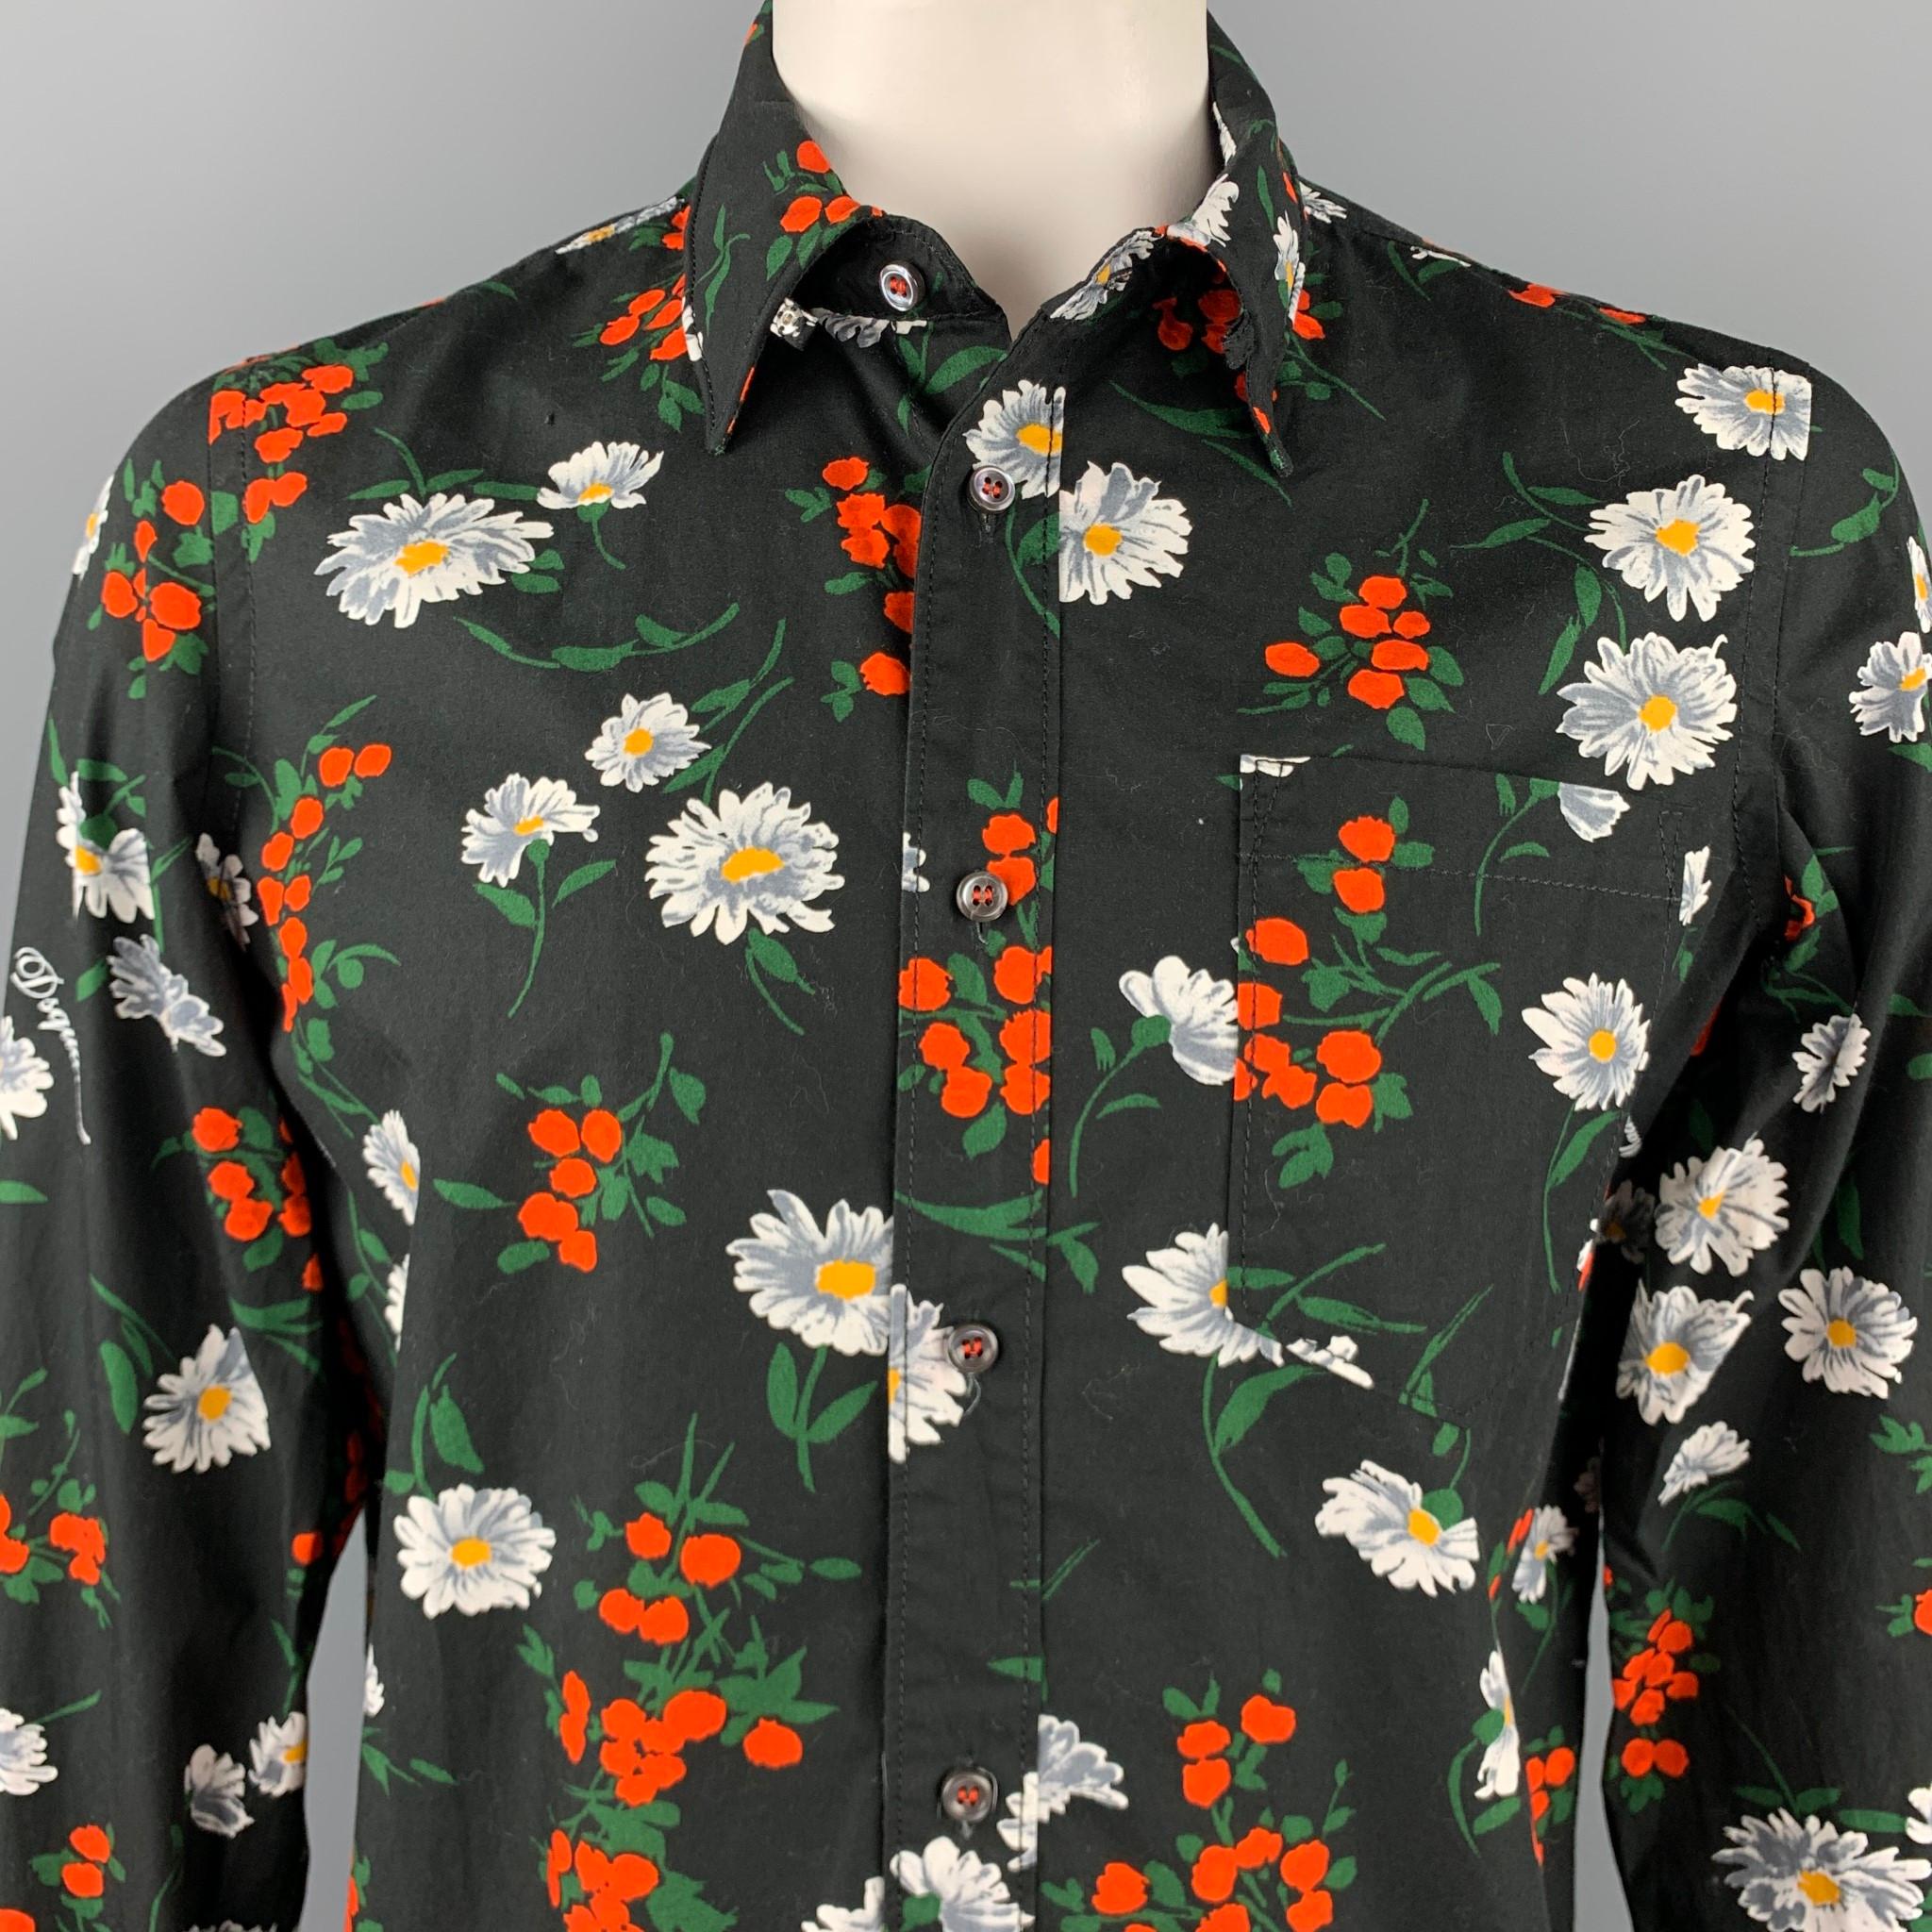 DSQUARED2 long sleeve shirt comes in a black floral cotton with a wired collar and cuffs featuring a button up style, patch pocket, and a spread collar. Made in Italy.

Excellent Pre-Owned Condition.
Marked: IT 52

Measurements:

Shoulder: 18.5 in.